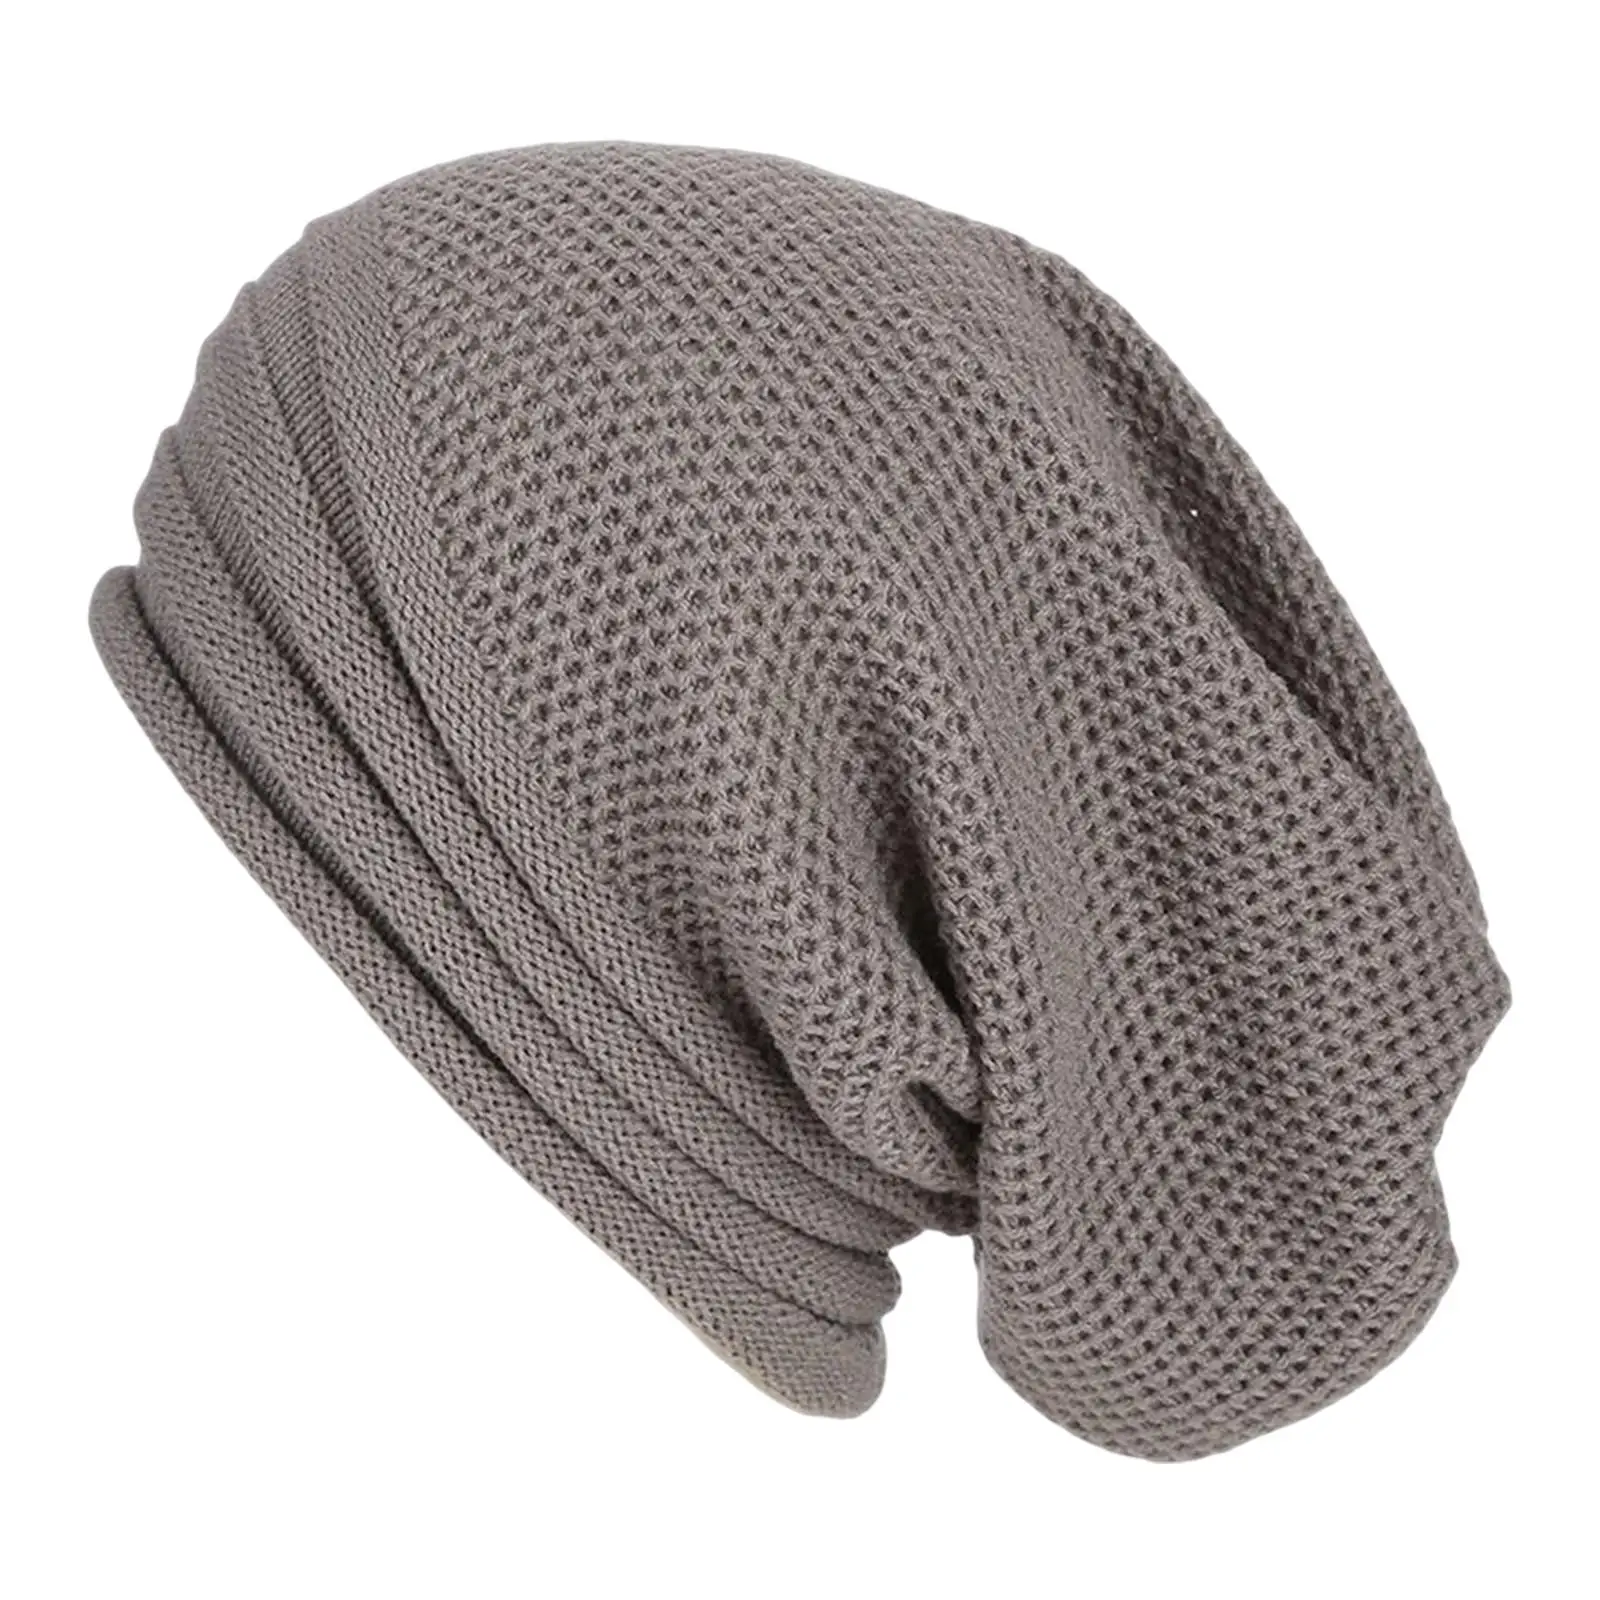 Winter Beanie Hats Thick Warm Slouchy Lightweight for Sport Women Gifts